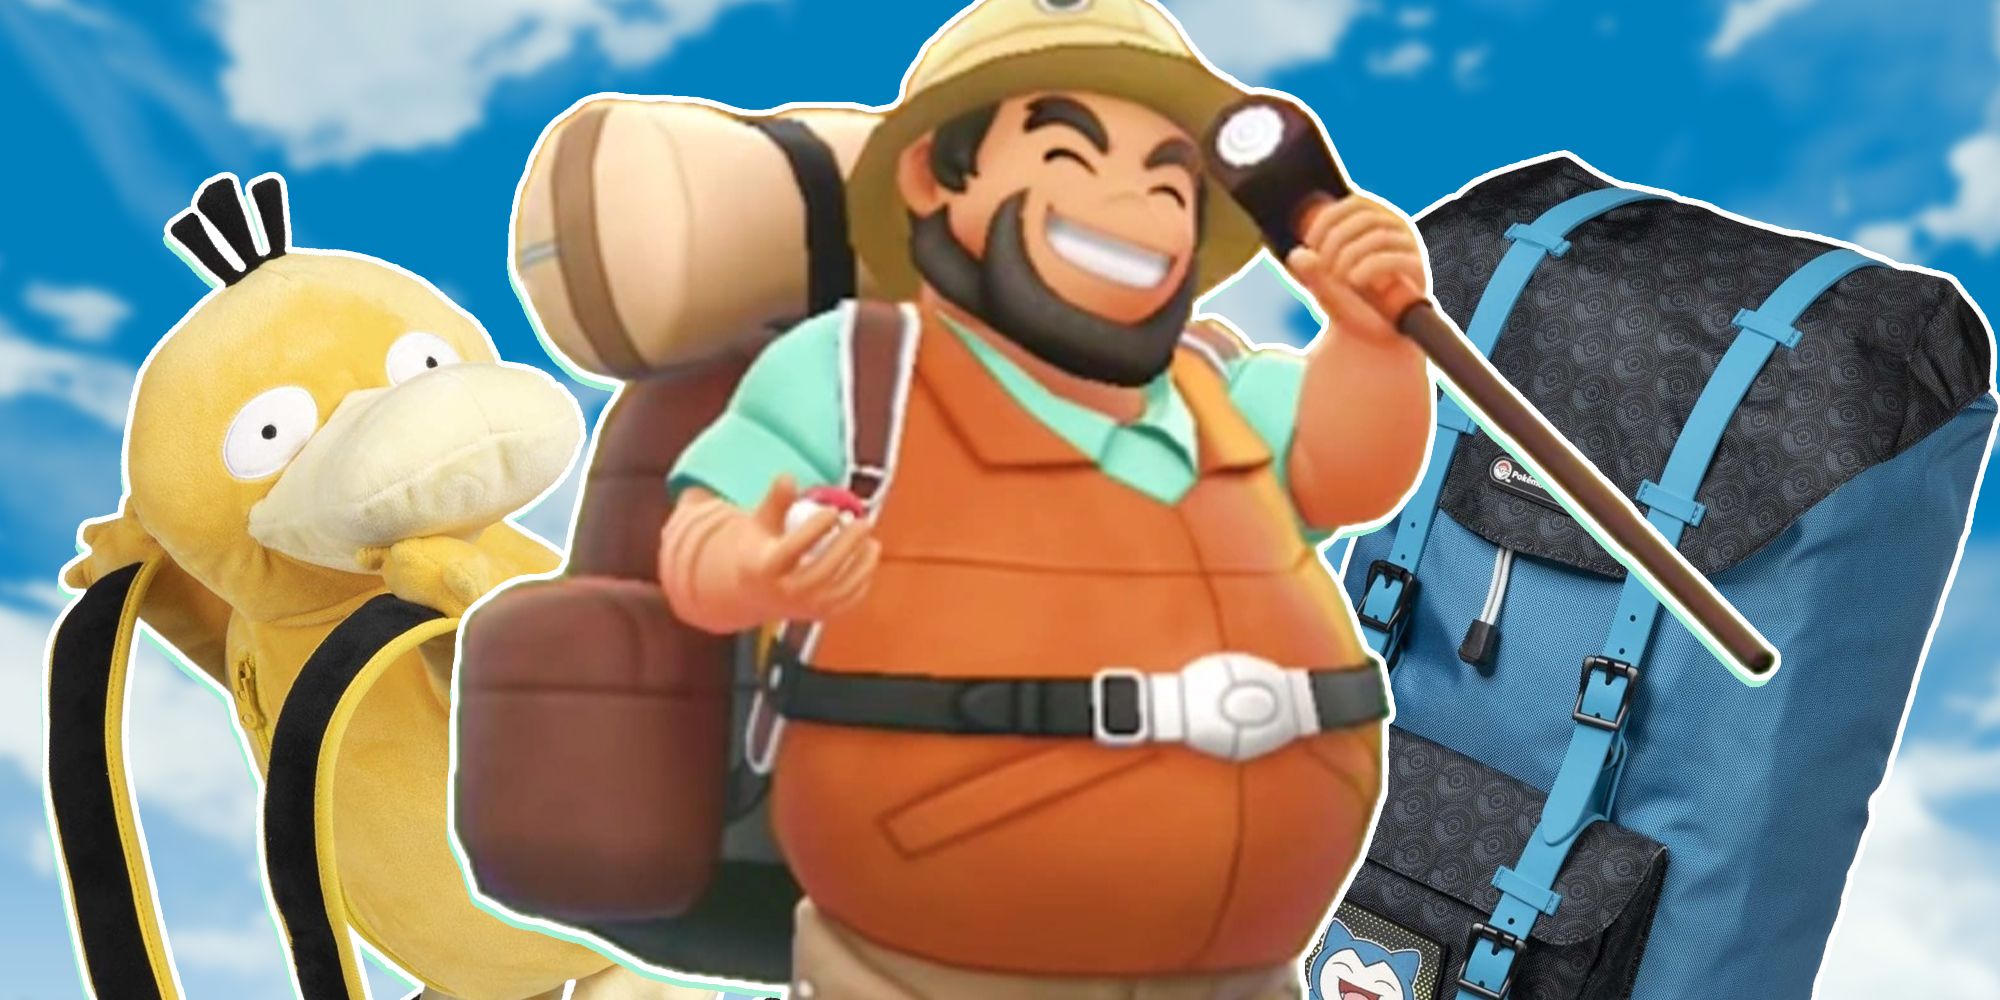 pokemon character with backpacks behind him